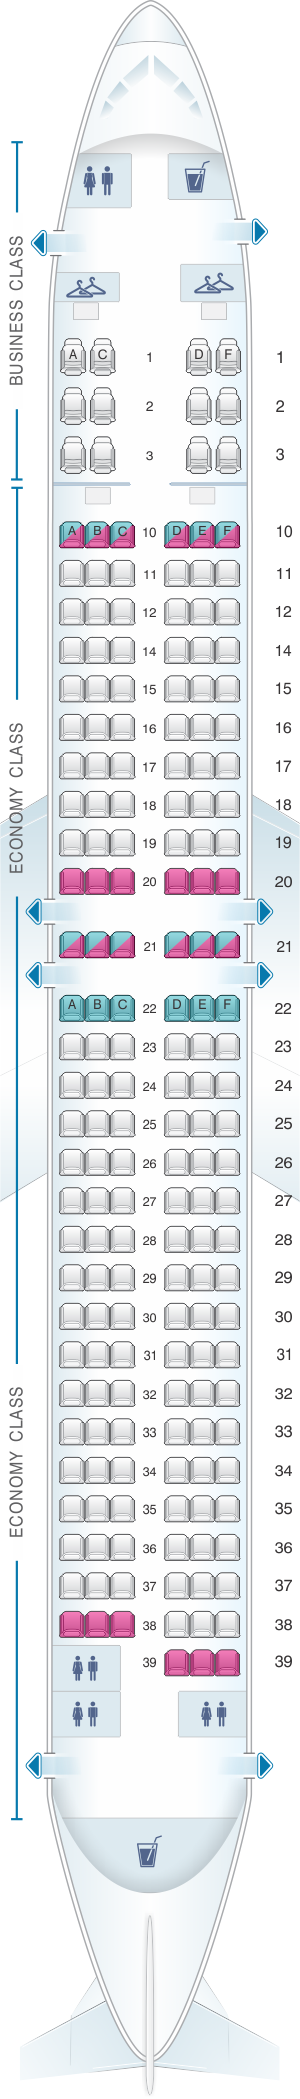 Seat map for Oman Air Boeing B737 900